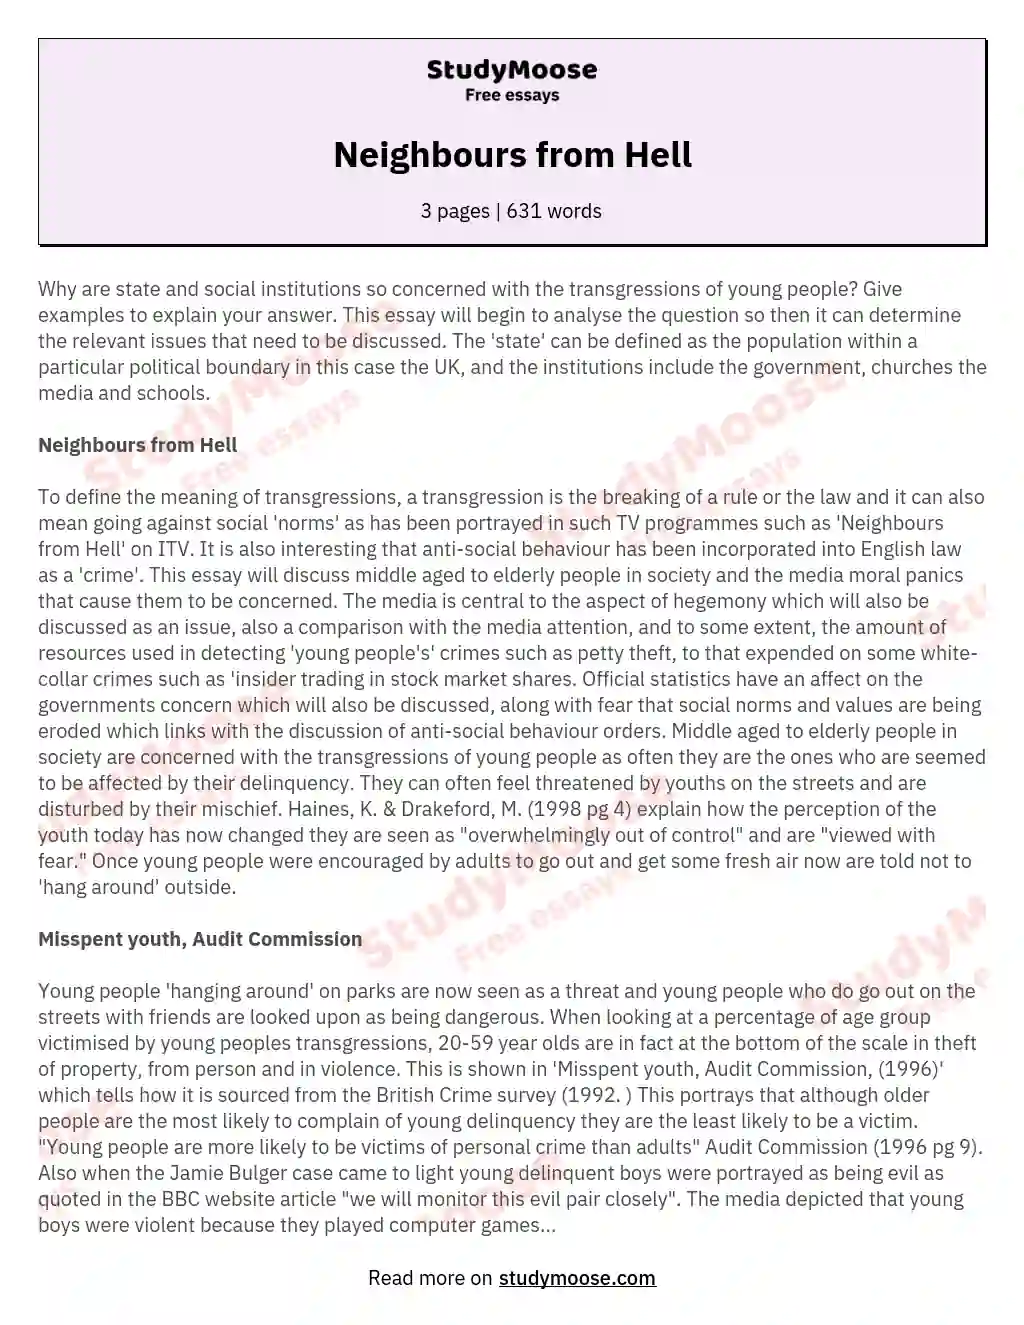 Neighbours from Hell essay